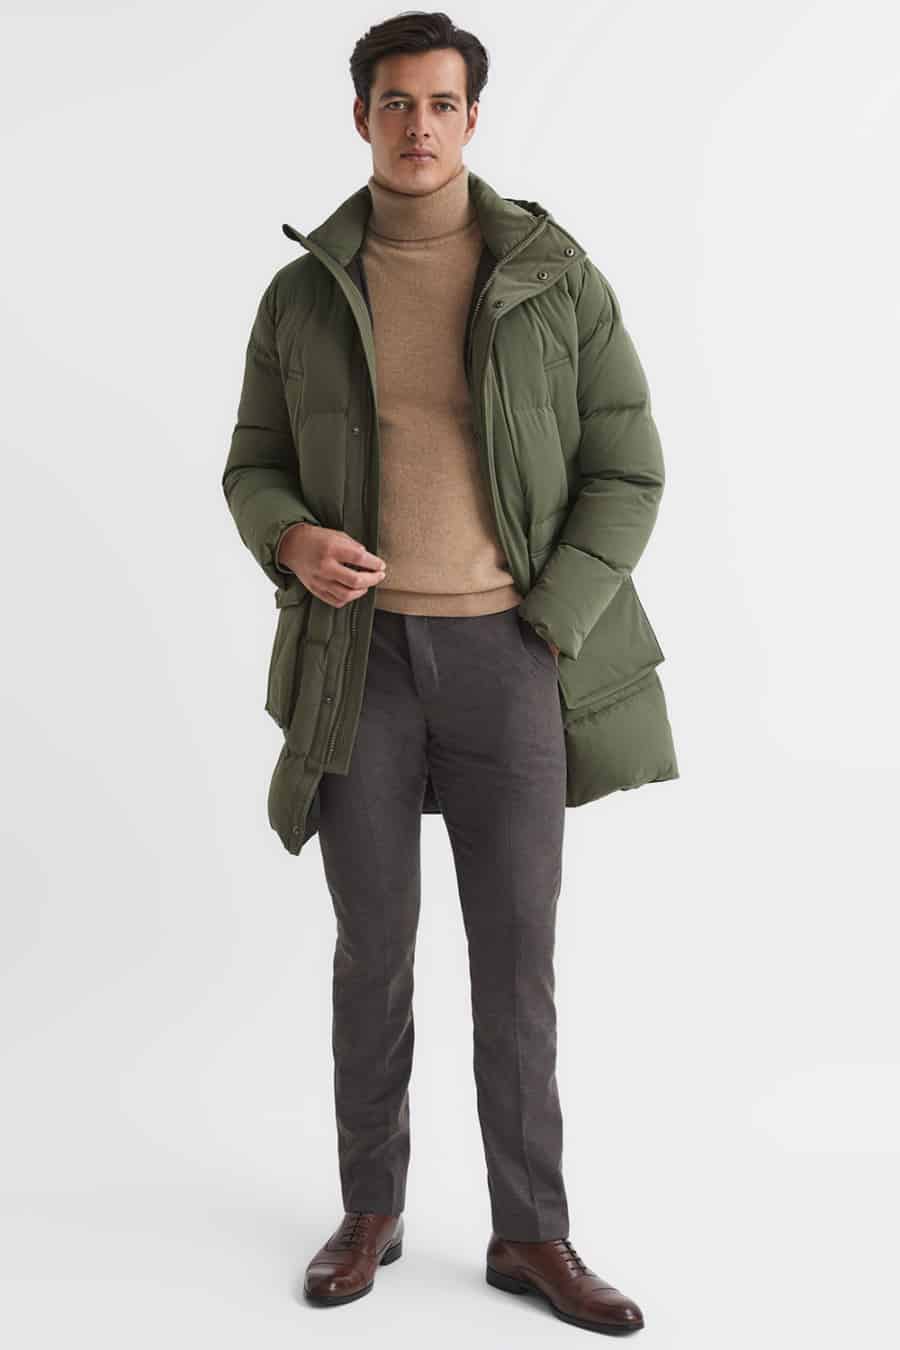 Men's grey wool trousers, camel turtleneck, green puffer jacket and brown oxford shoes outfit